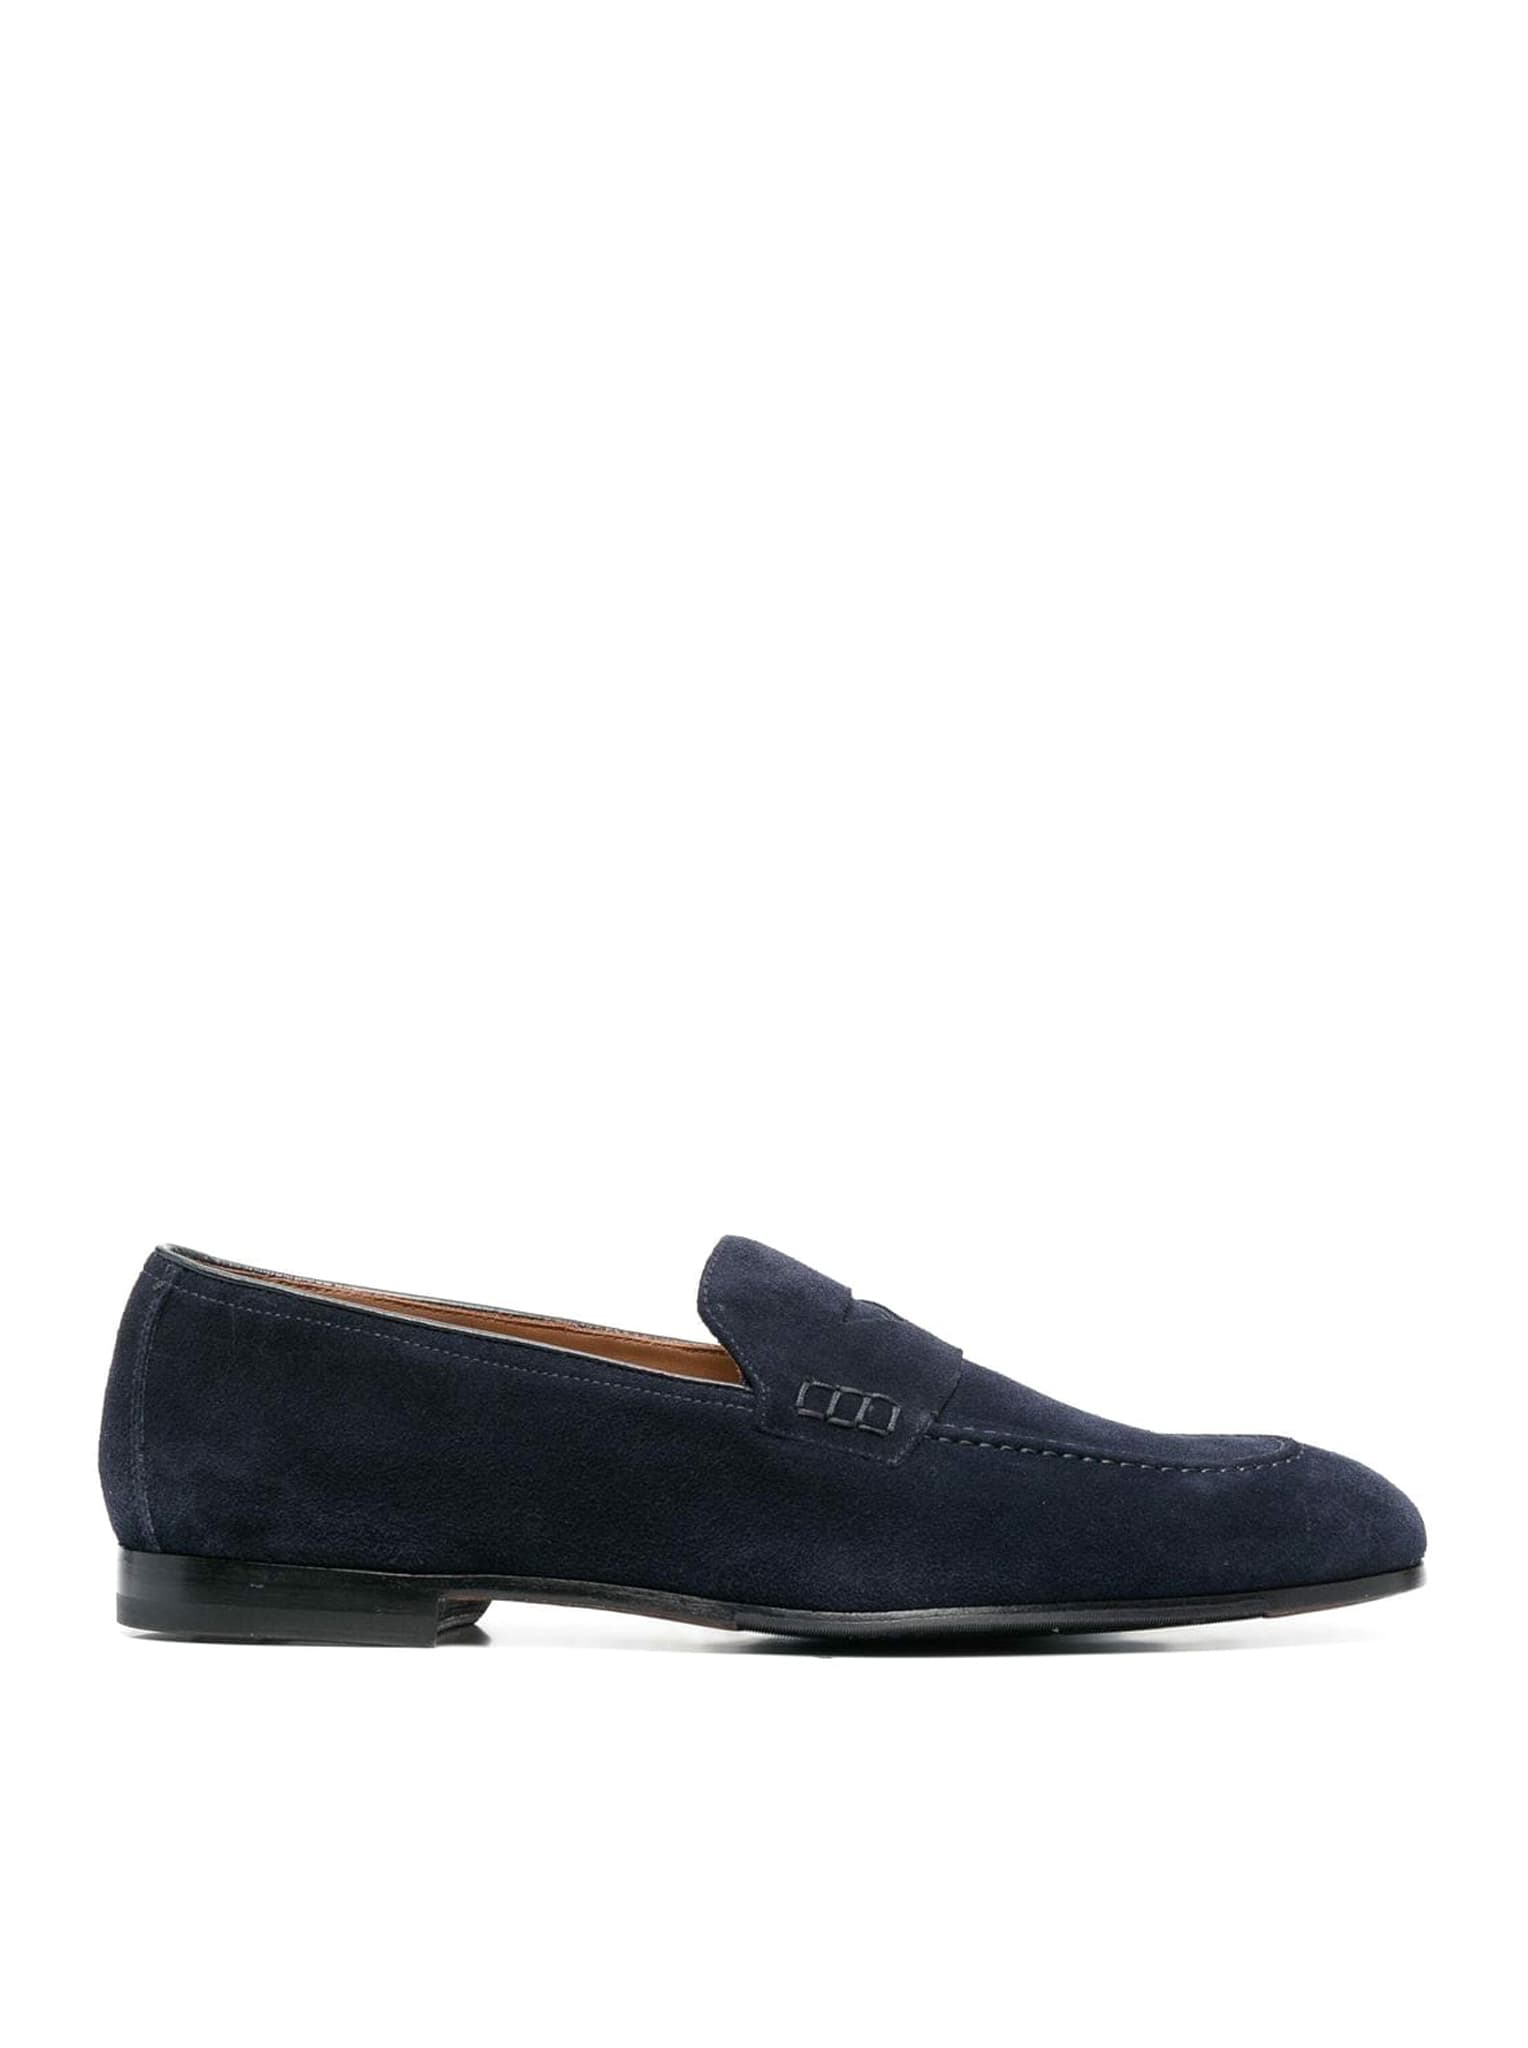 DOUCAL'S LOAFER SUEDE